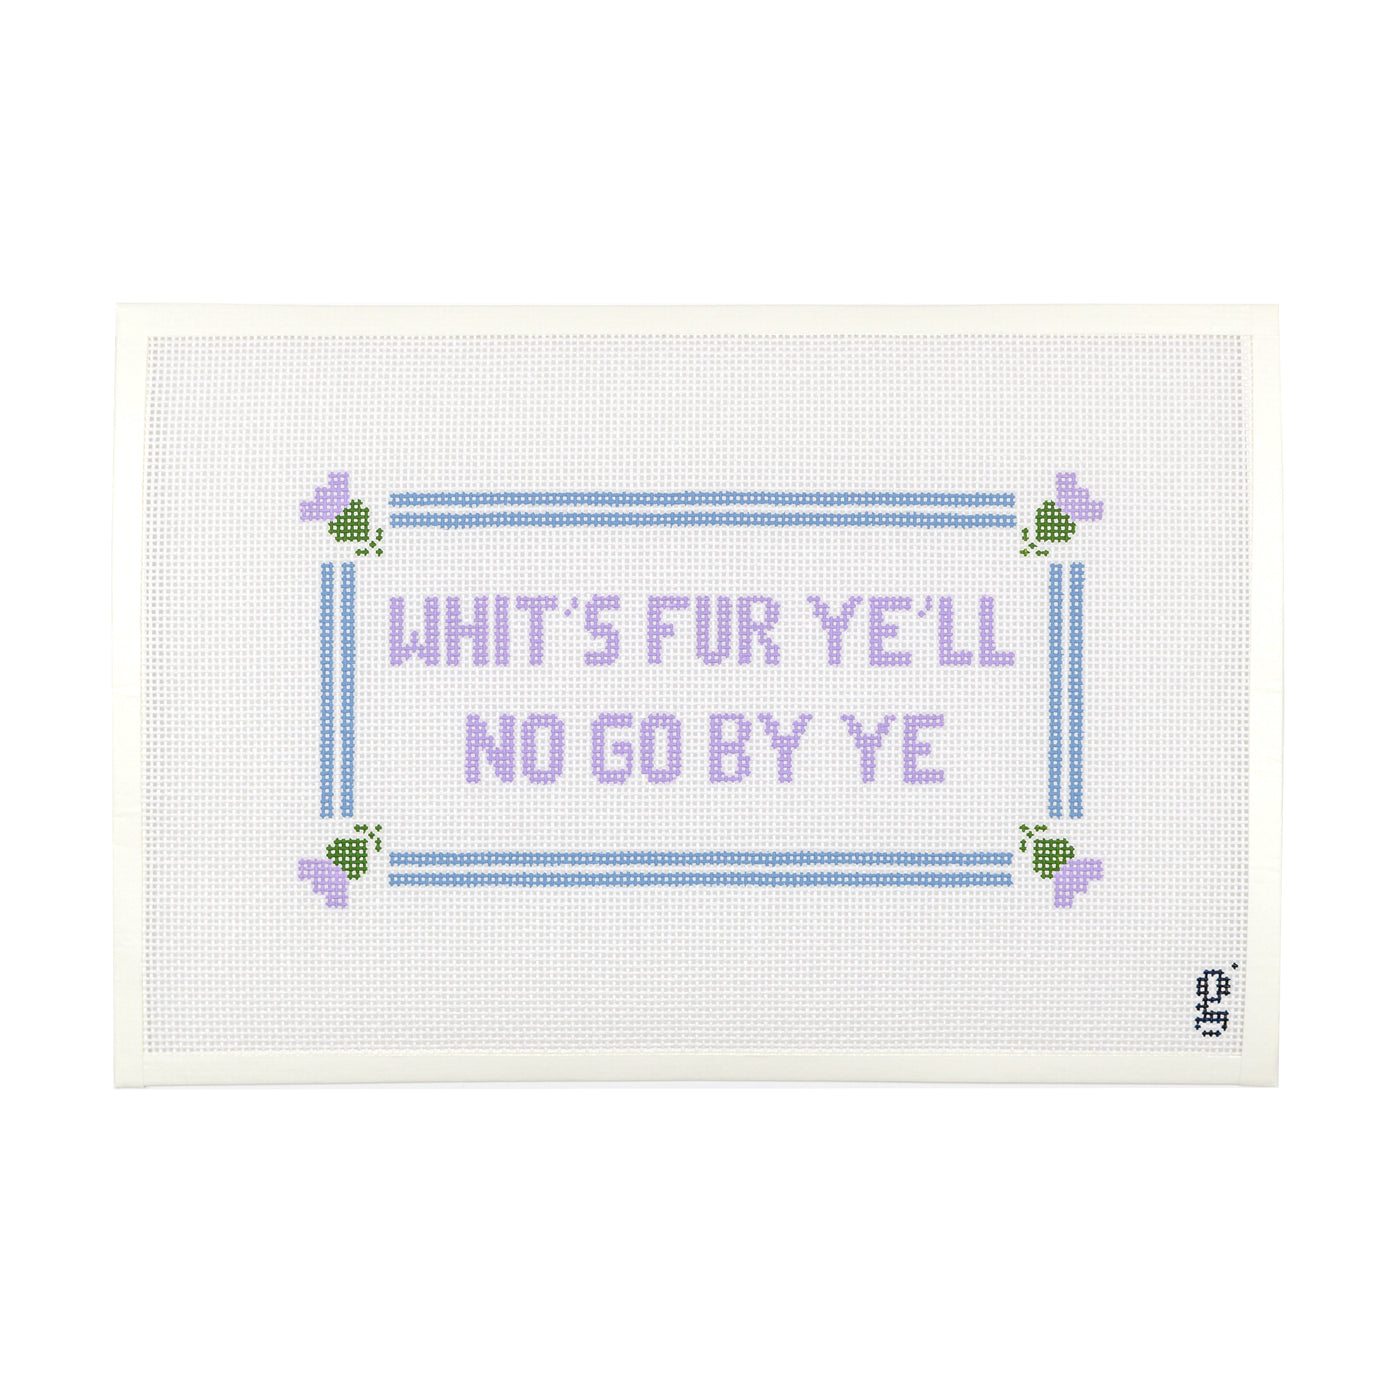 Rectangular hand painted needlepoint canvas with a purple and green thistle in each corner, a blue striped border, and purple block letters spelling out "Whit's Fur Ye'll No Go By Ye."